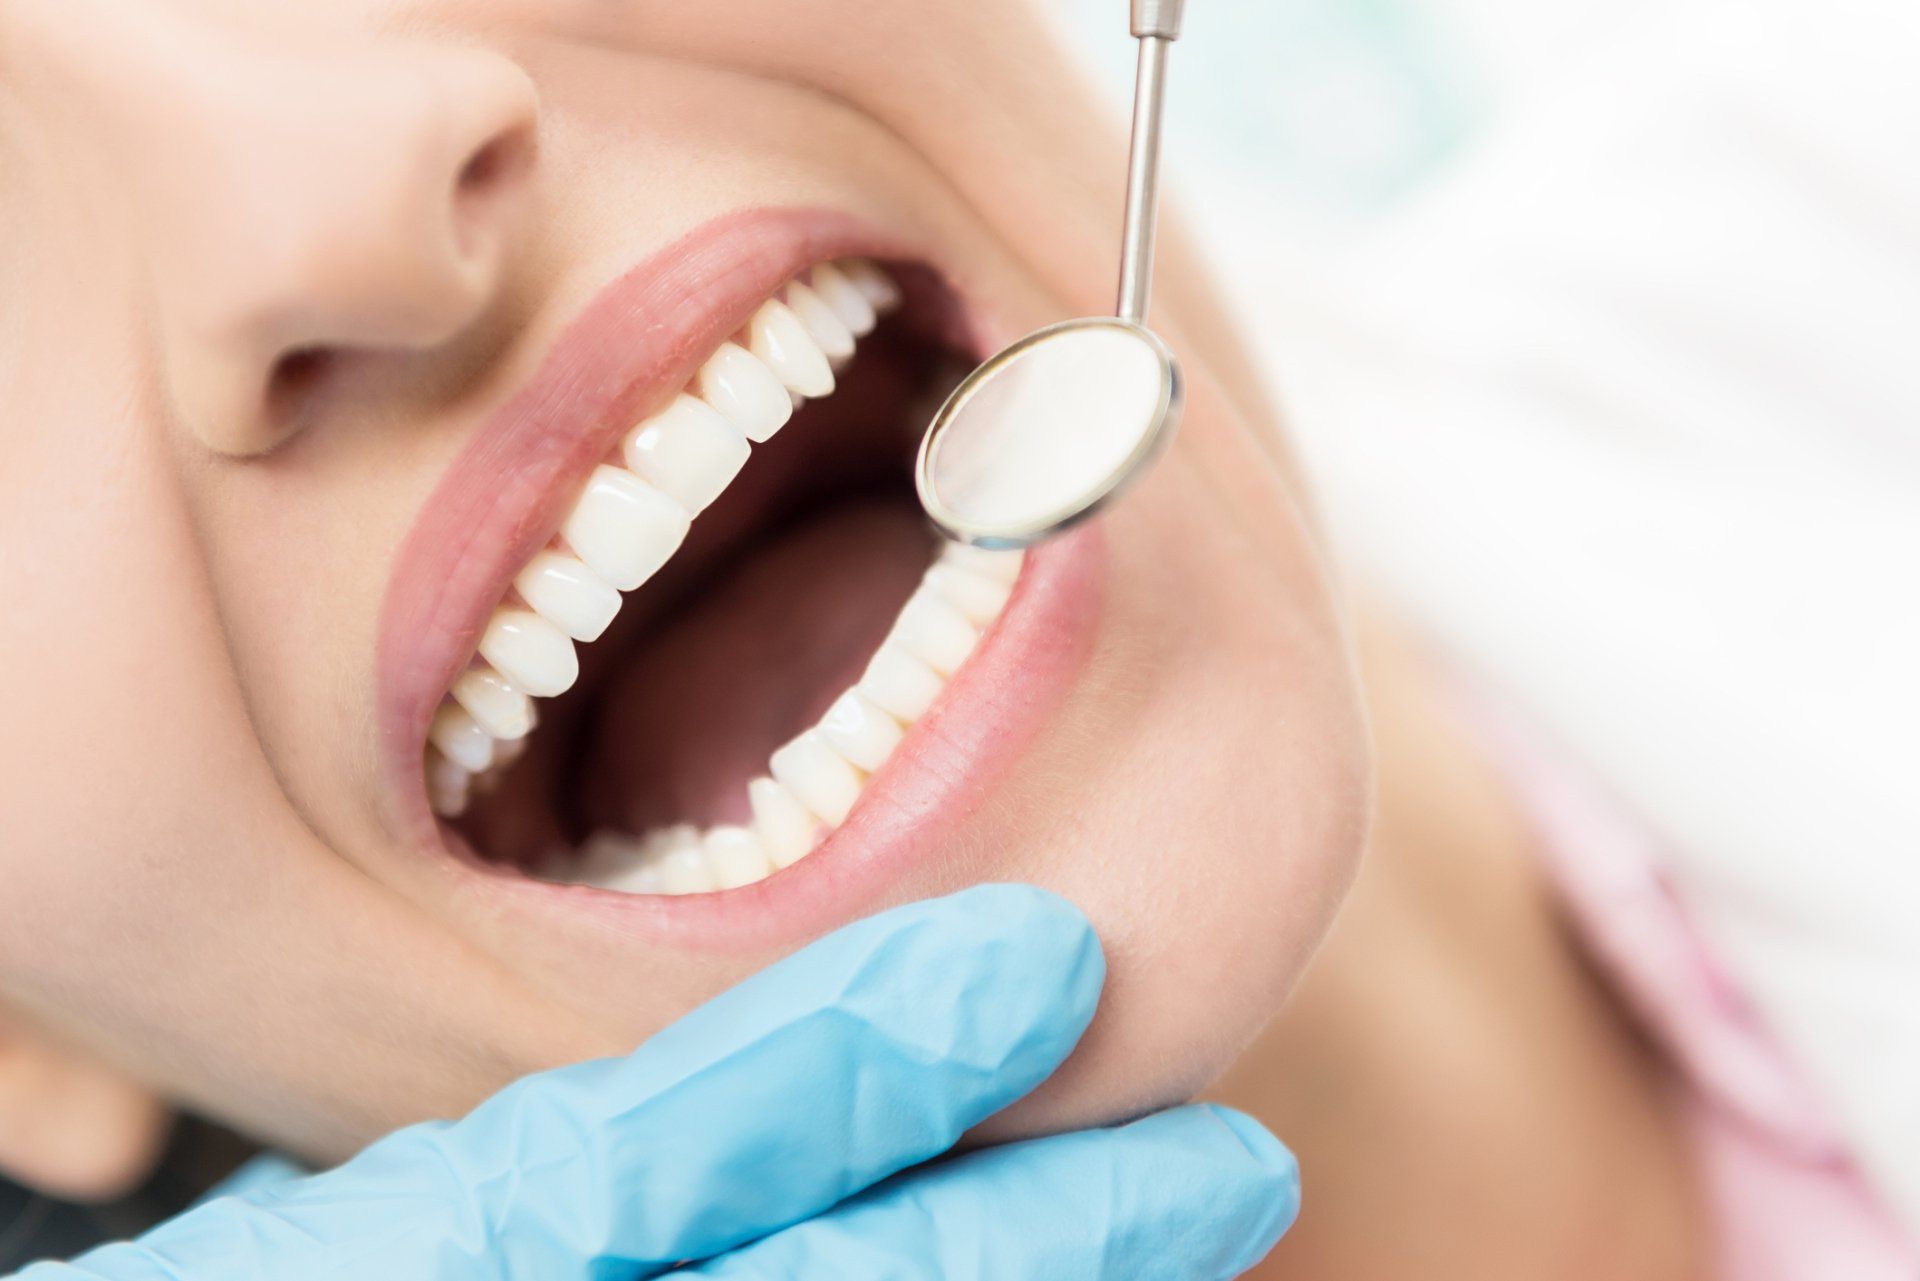 woman with healthy gums and teeth having a dental exam